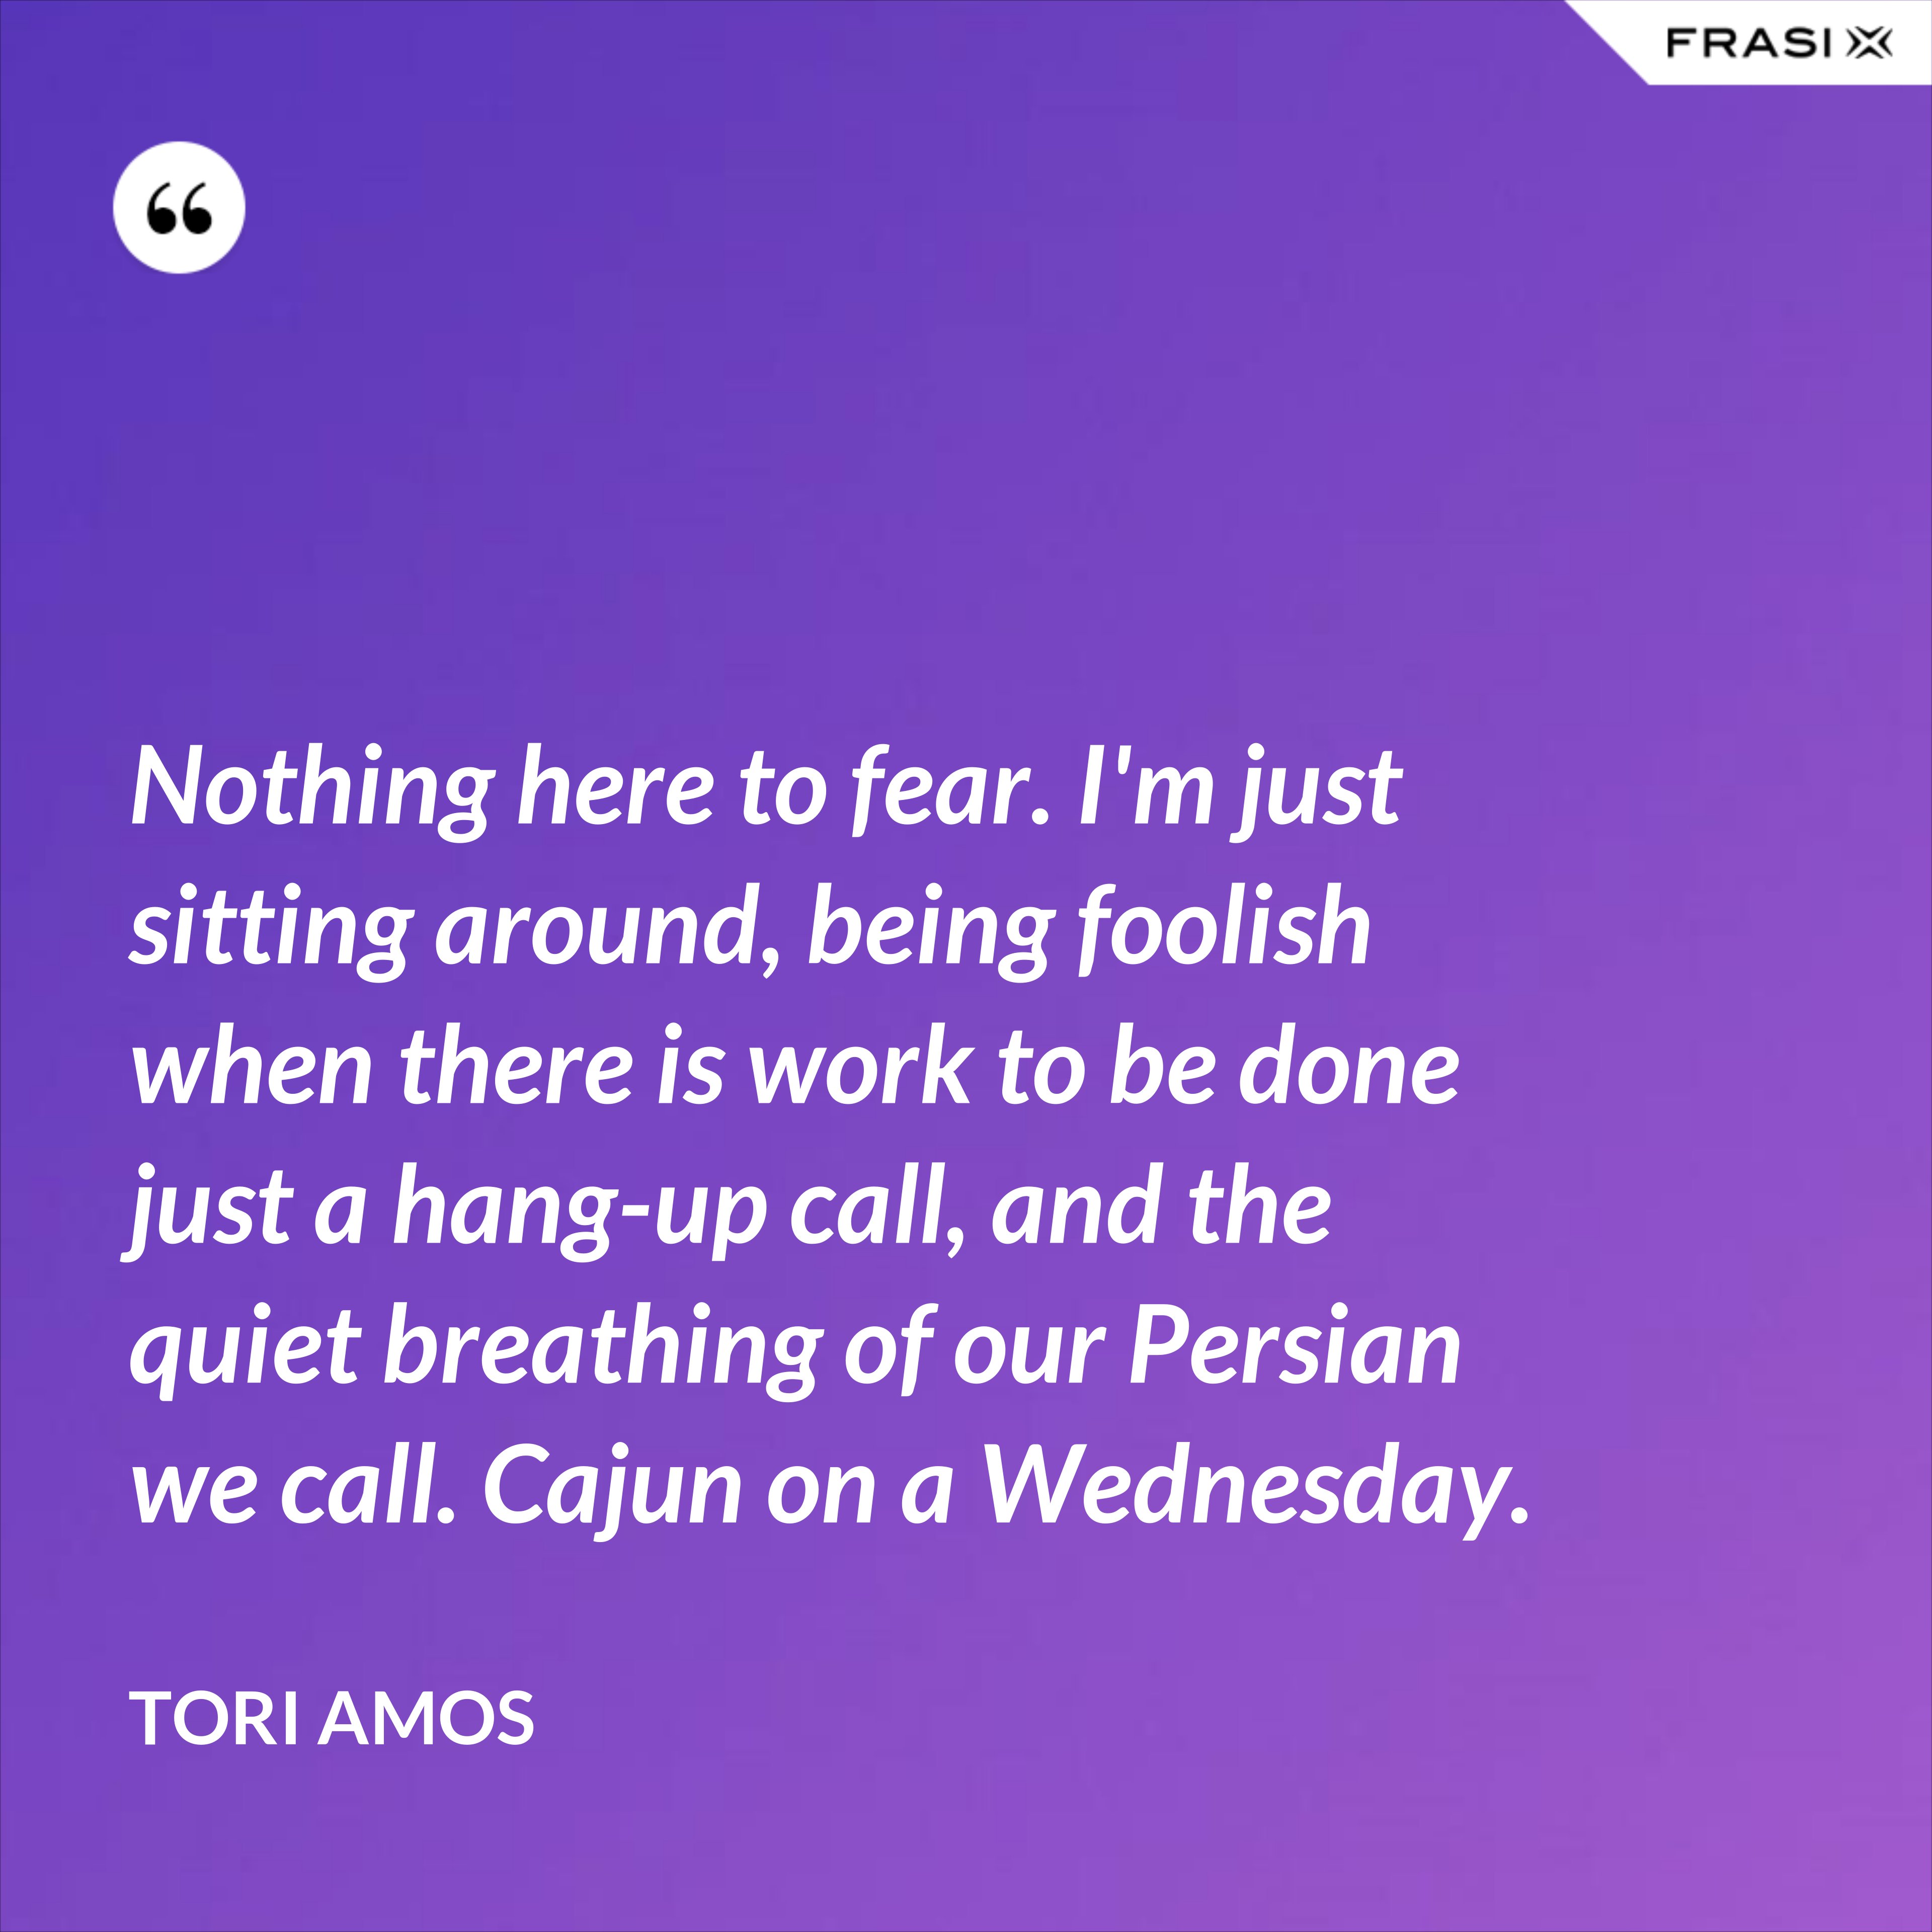 Nothing here to fear. I'm just sitting around, being foolish when there is work to be done just a hang-up call, and the quiet breathing of our Persian we call. Cajun on a Wednesday. - Tori Amos